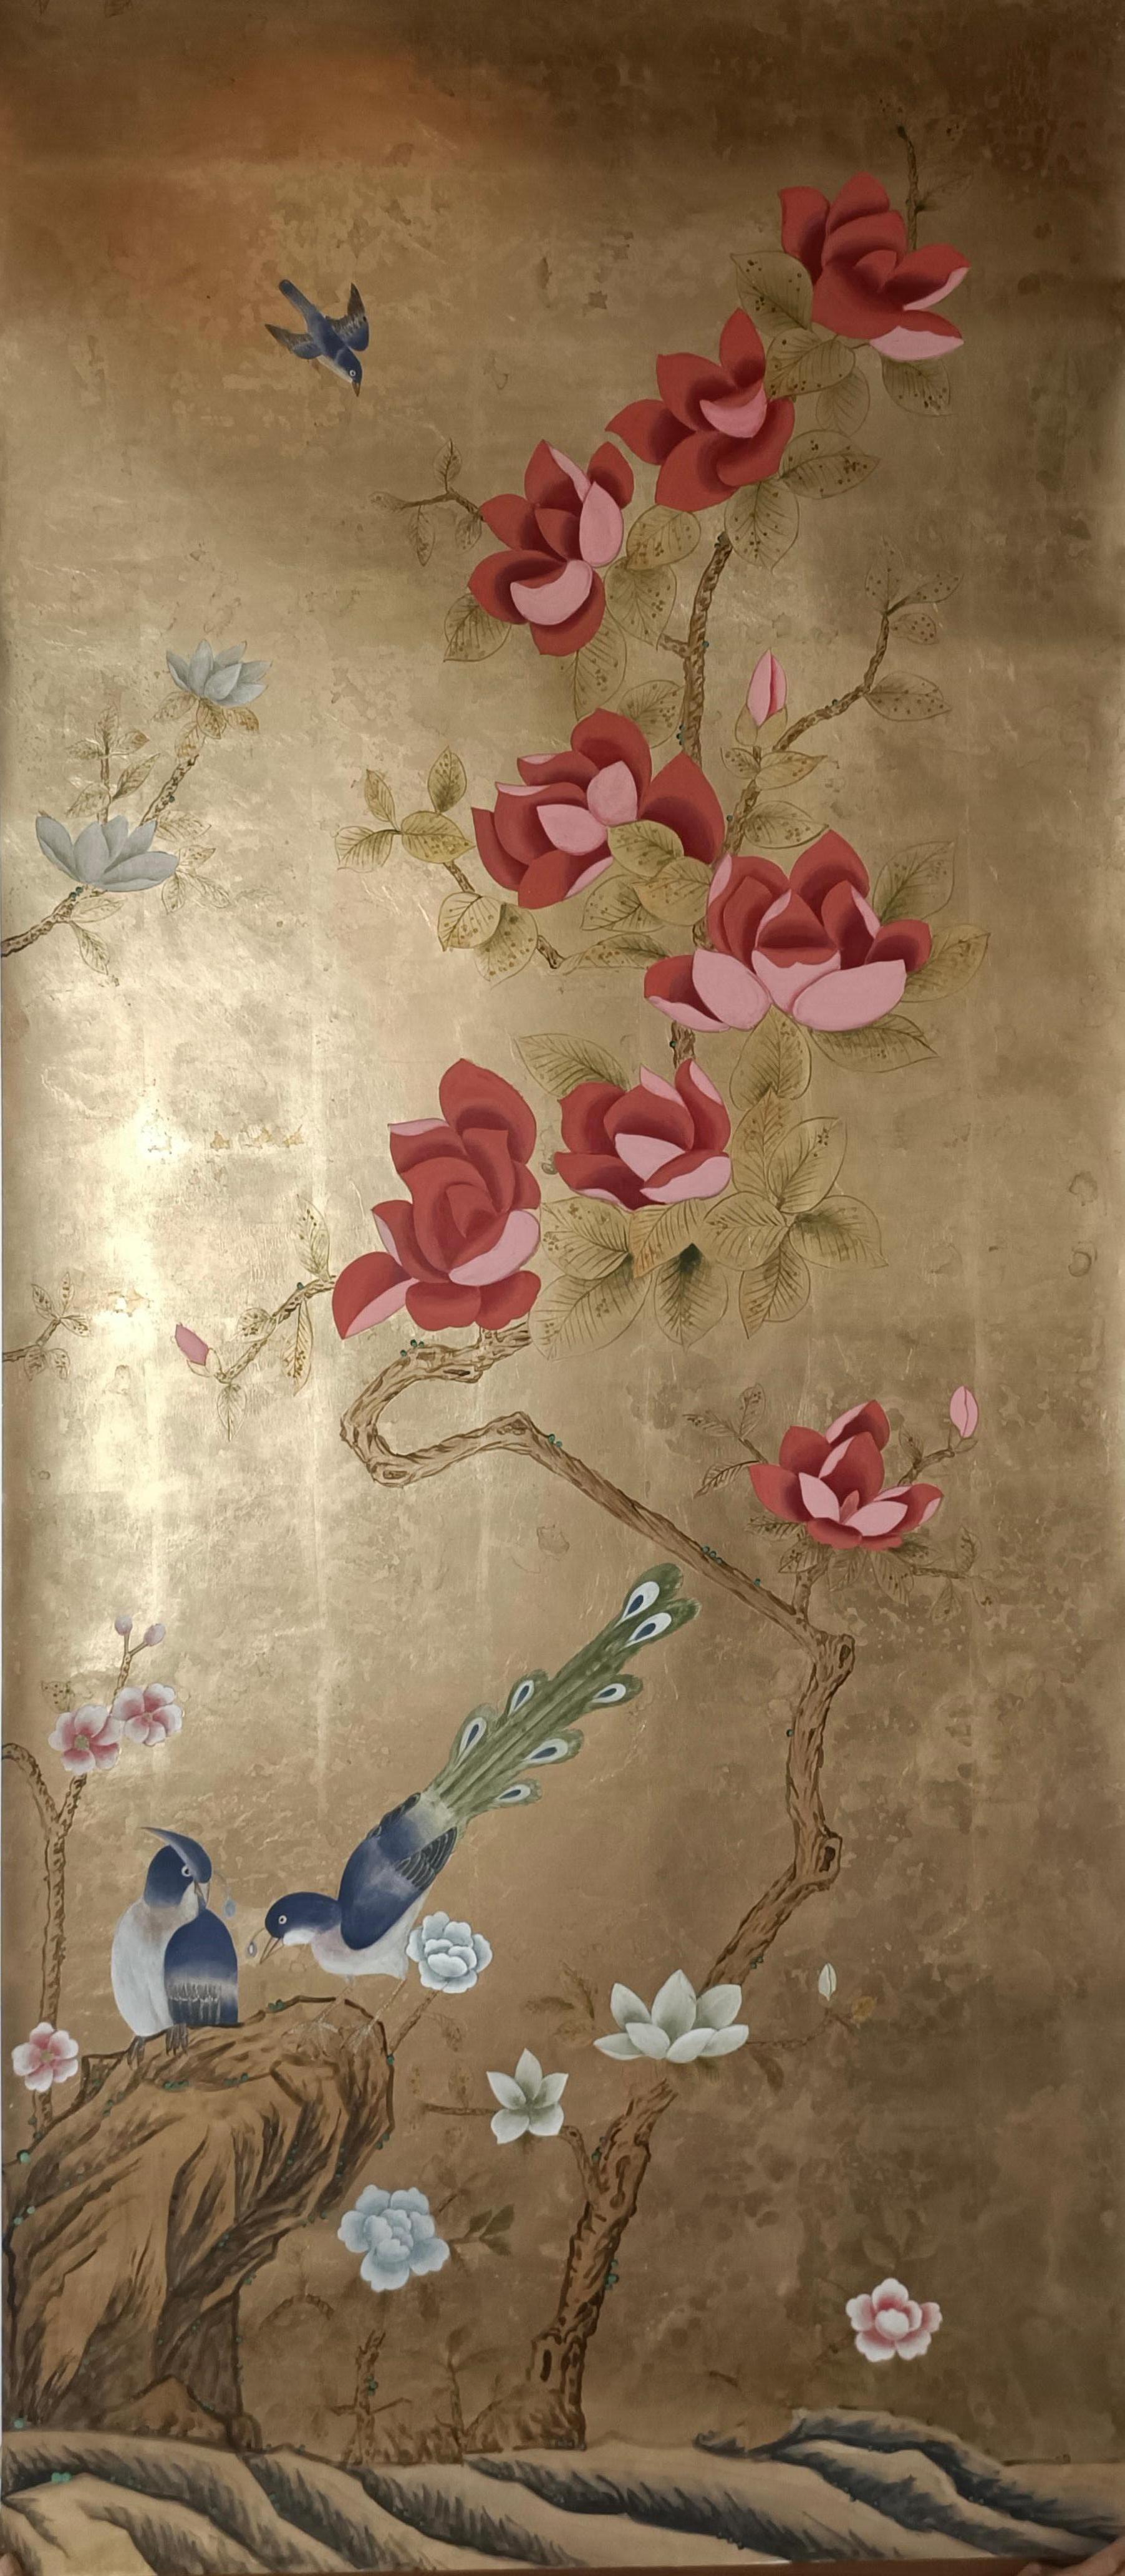 If you love the look of De Gournay wallpaper but not the price, this is for you. Measures: 3 ft x 8 ft.

The colorways in this sections present our latest colorways, which can be applied to any designs and any base ground (silk, tea paper,